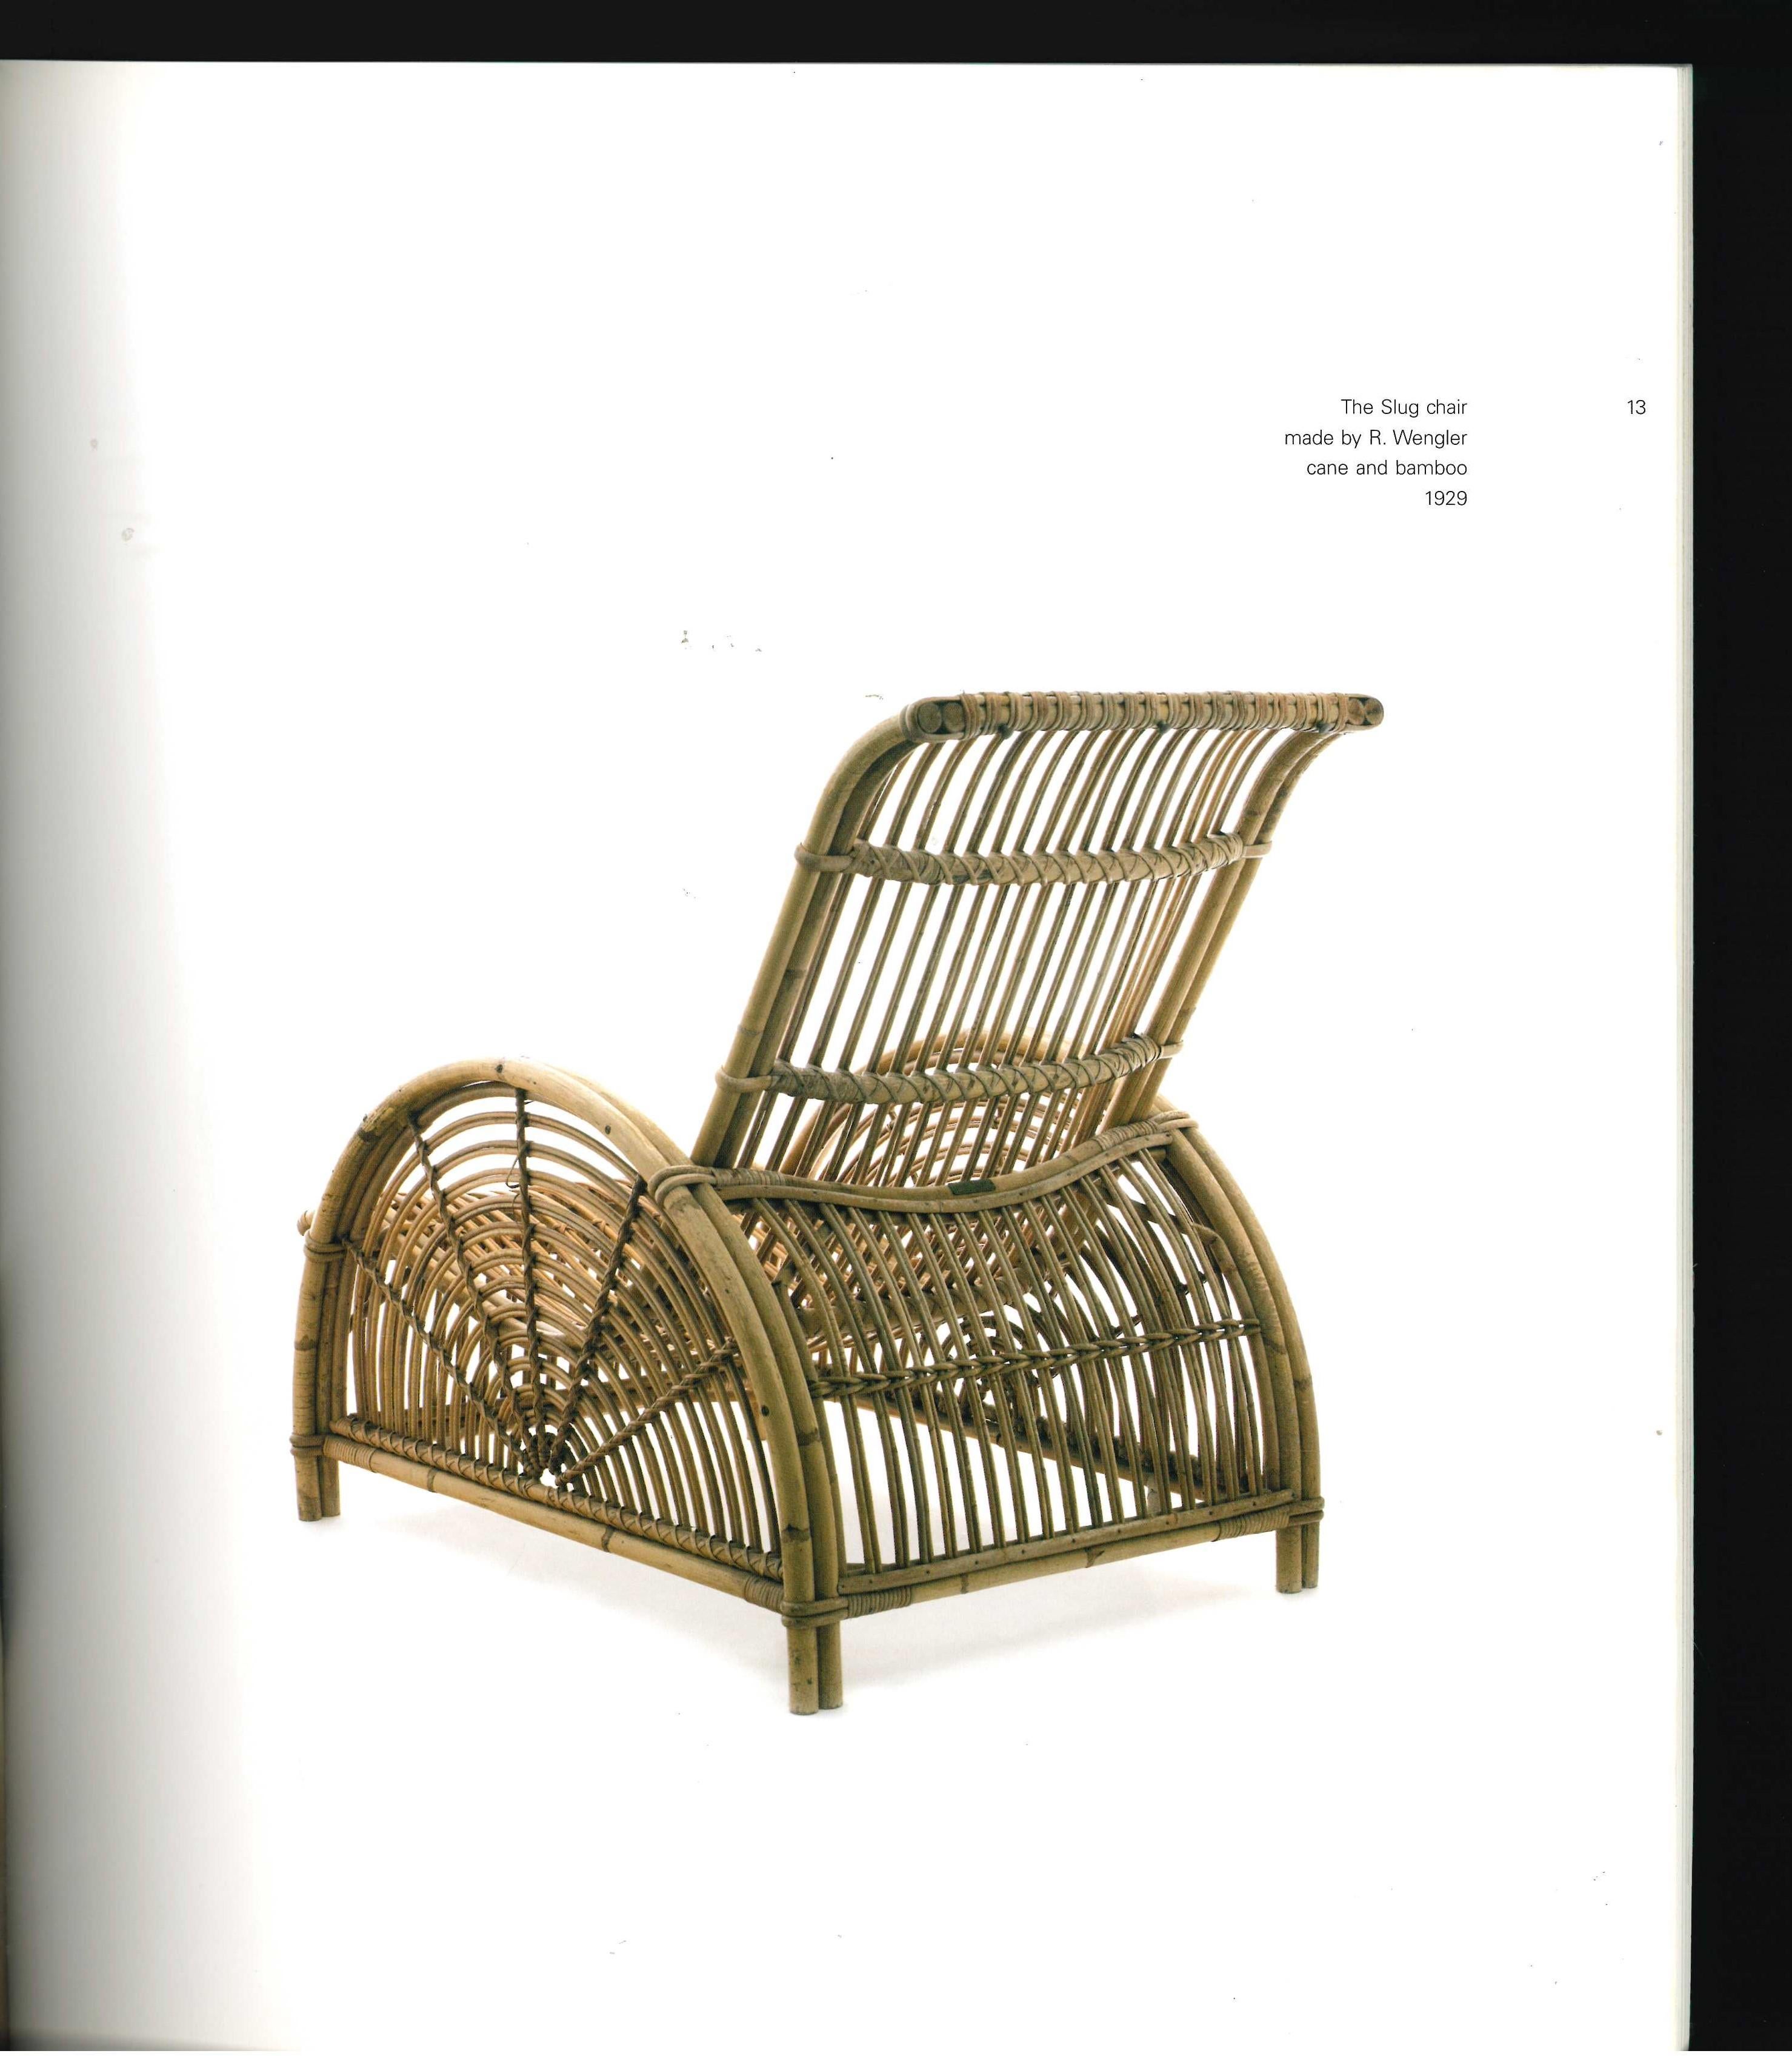 A first edition soft cover published in 2002, with an introduction by Carsten Thau and Kjeld Vindum followed with an essays by Marie-Louise Jensen and Maria Wettergren and 80 pages of photographs of furniture designs with brief descriptions.
Arne